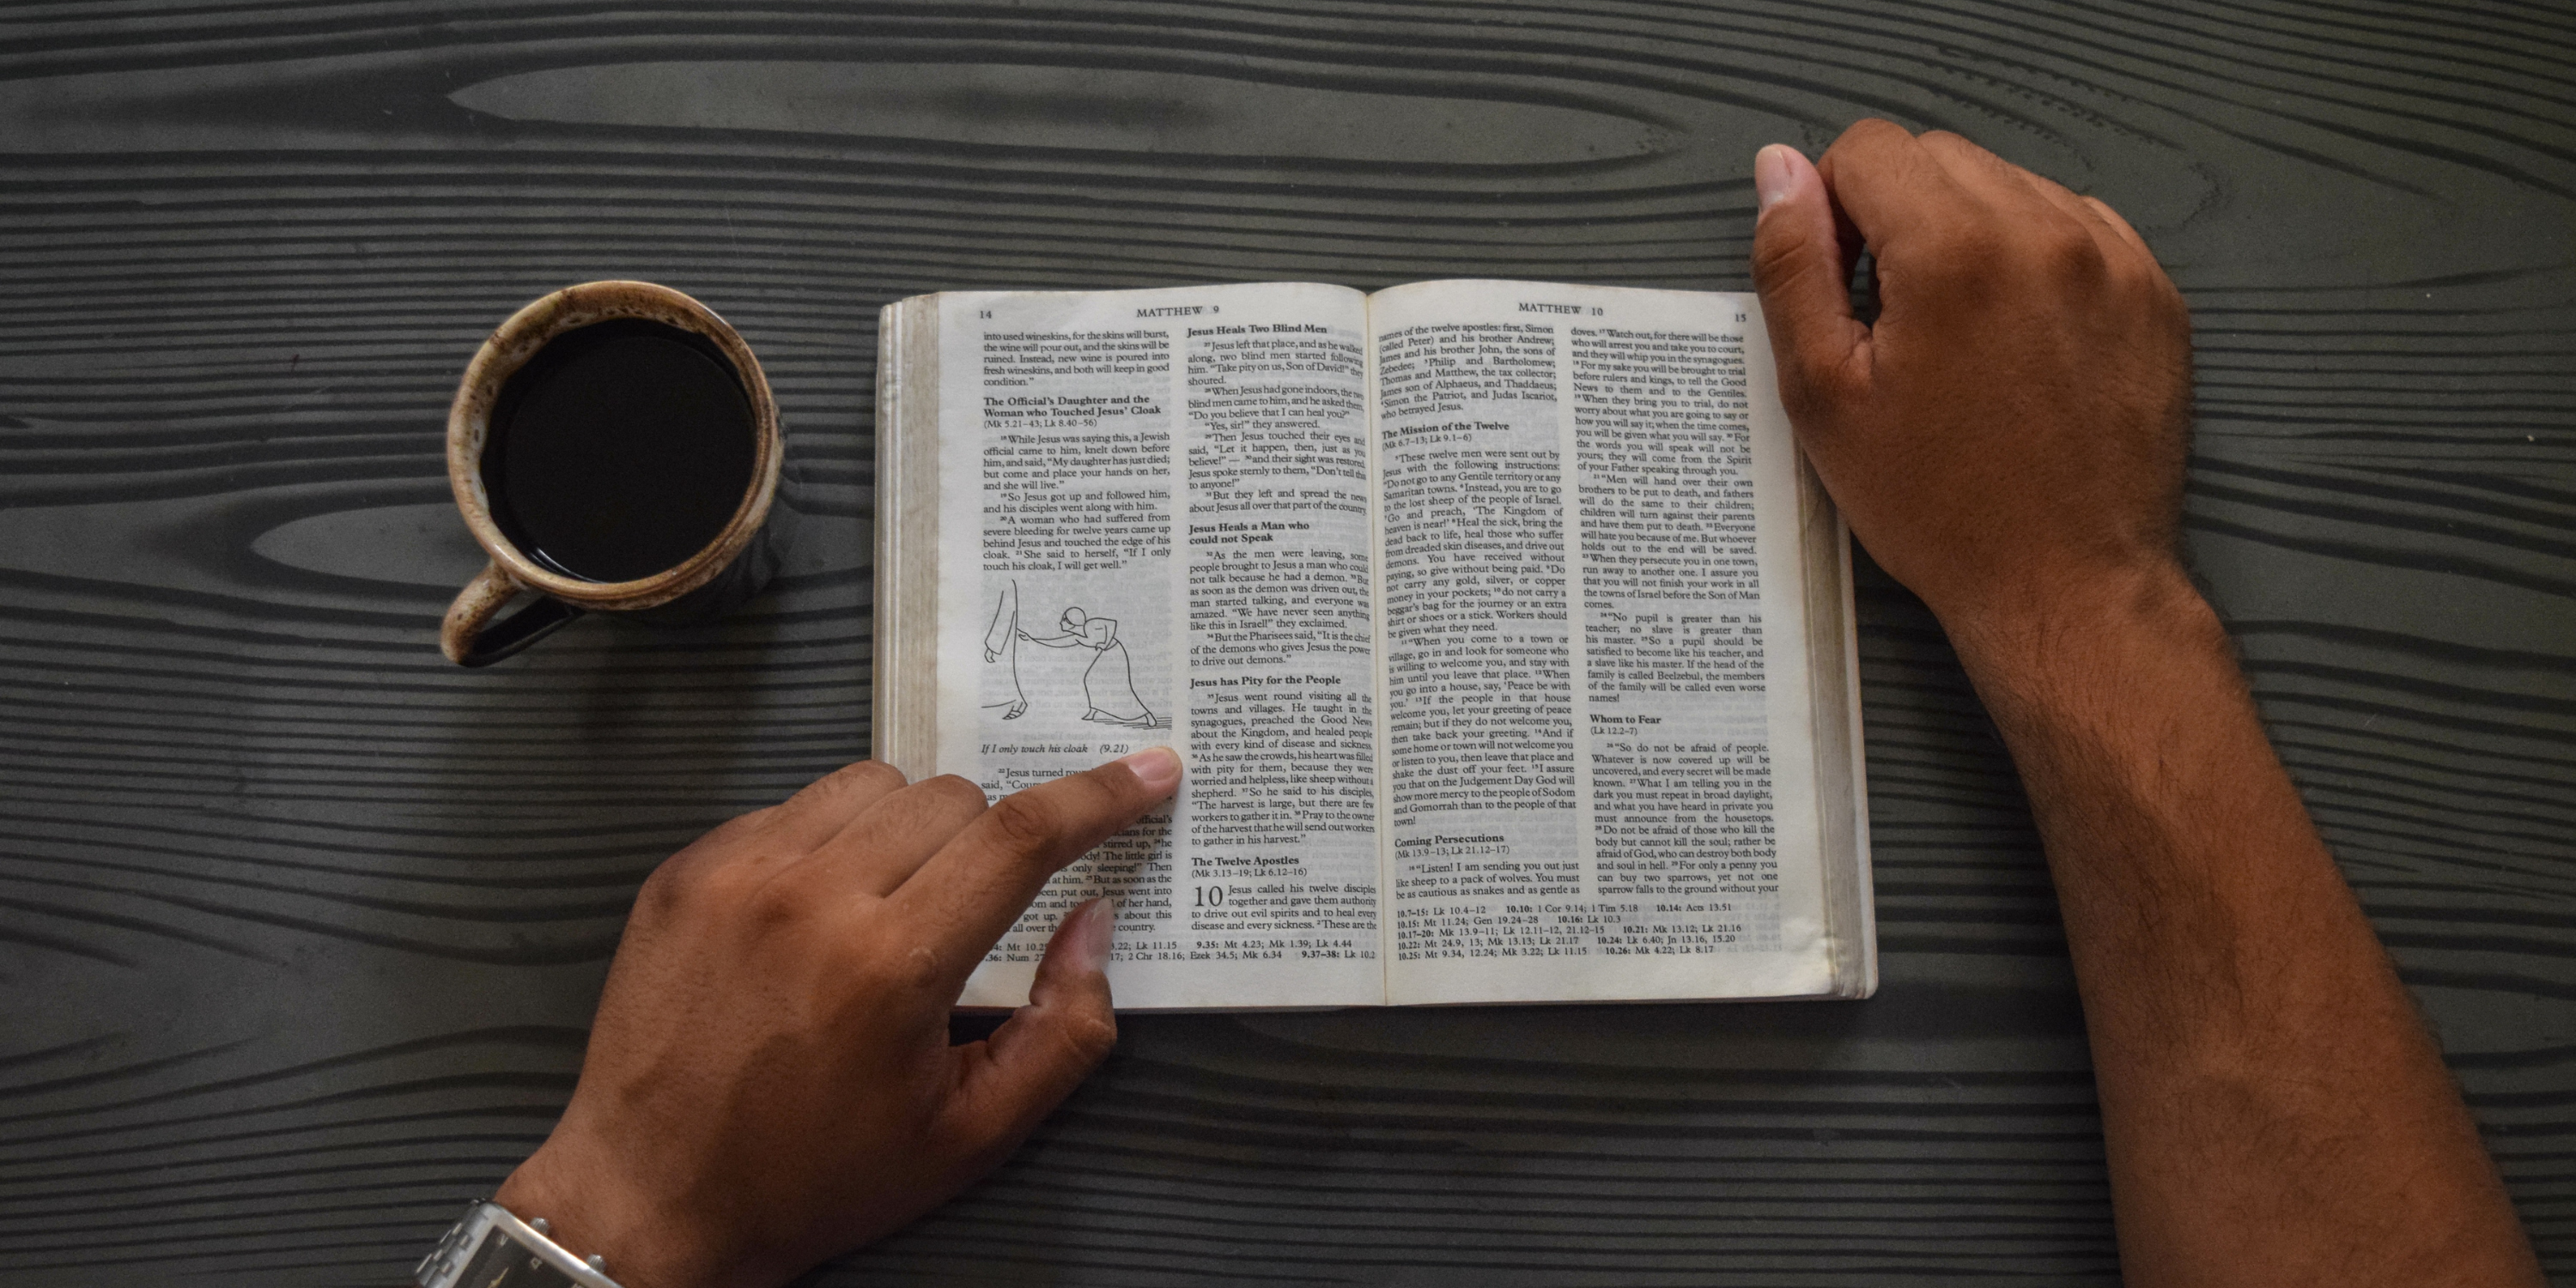 Top view of a person reading a Bible, with a cup of coffee next to them on the table